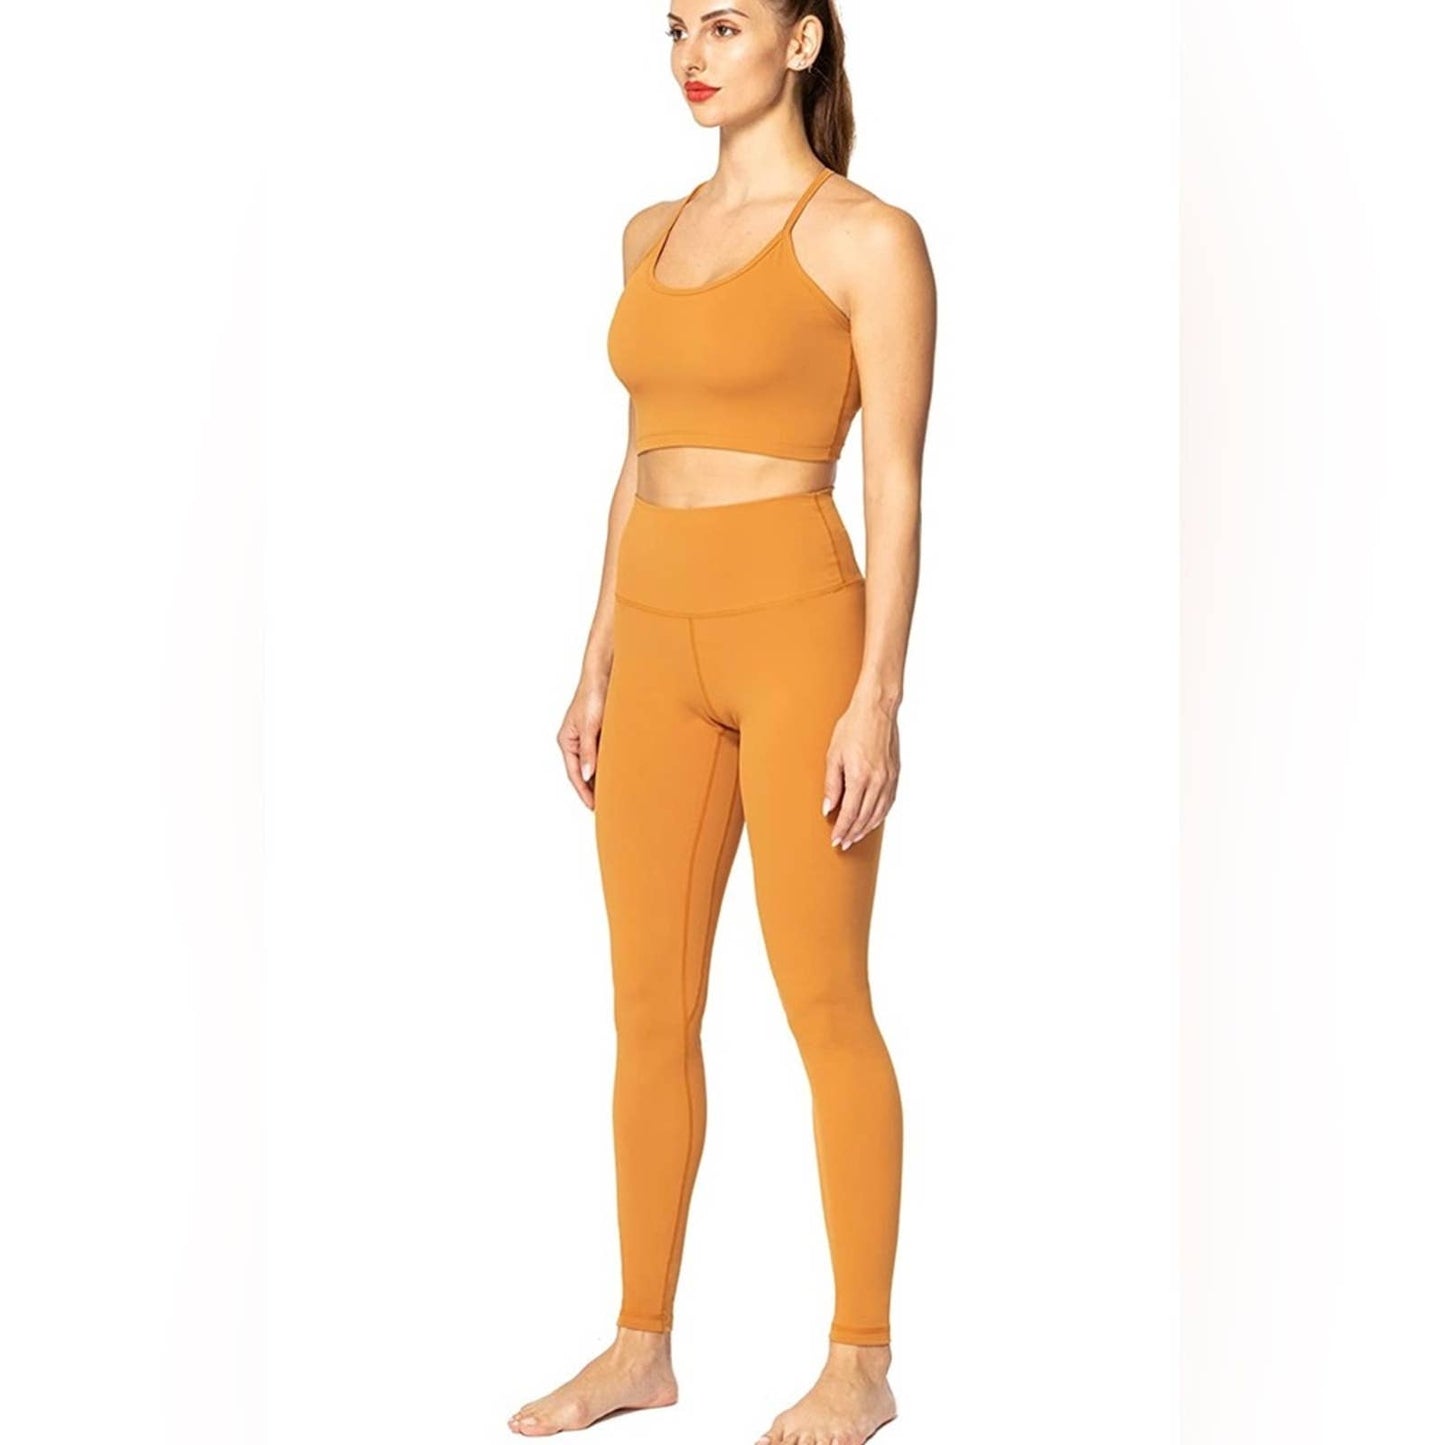 Sunzel Workout Leggings for Women, Squat Proof High Waisted Yoga, Buttery Soft MD